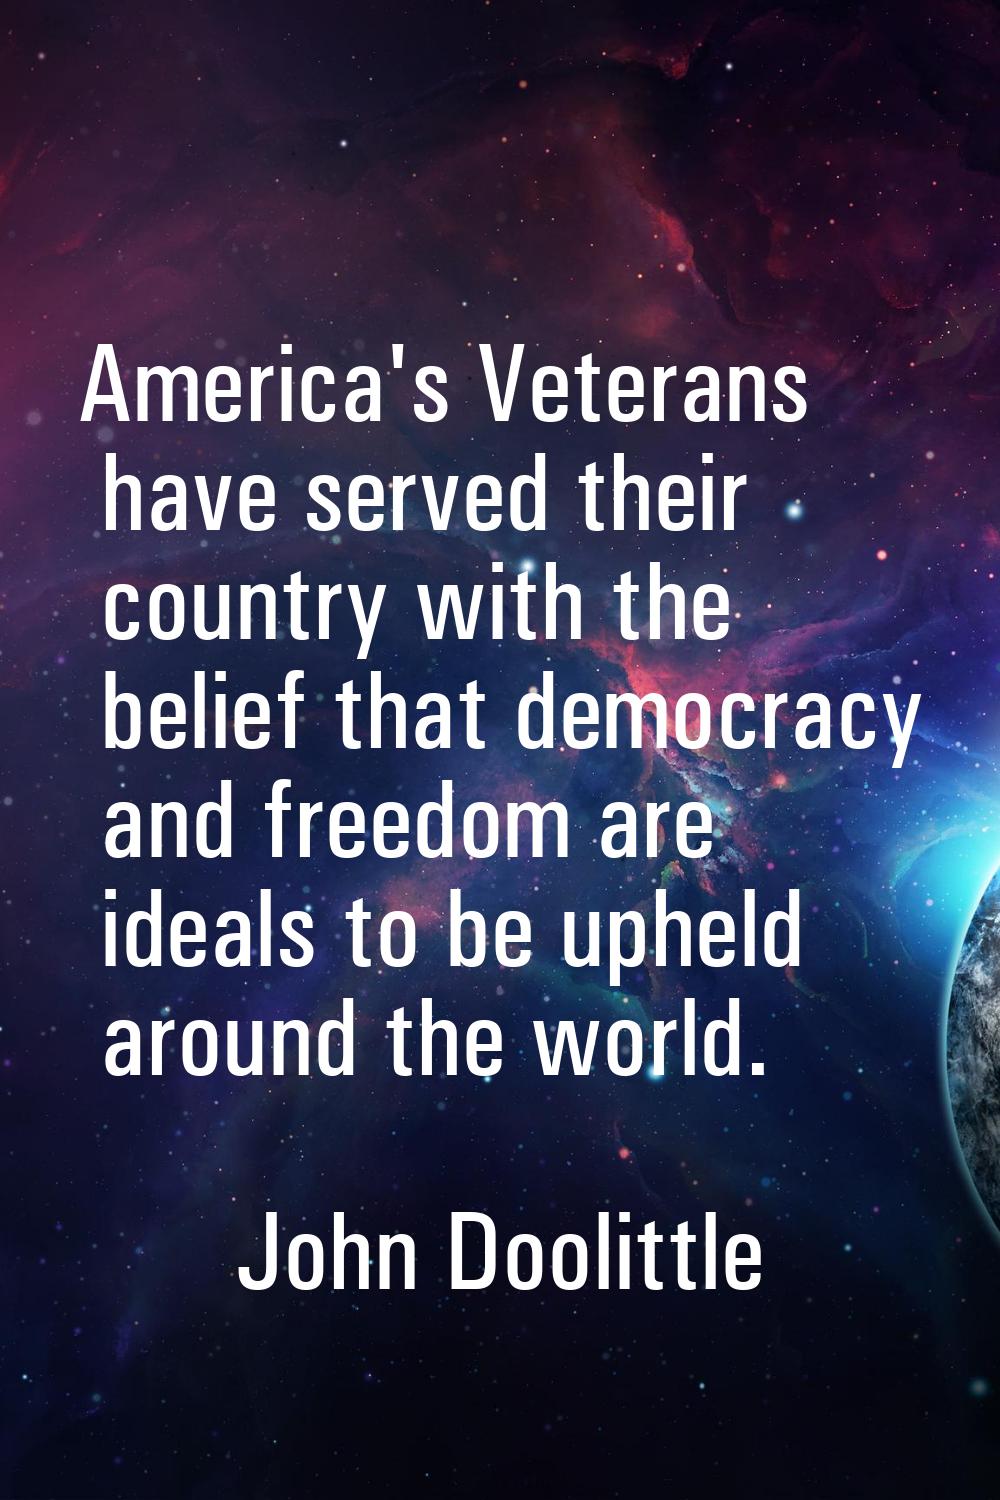 America's Veterans have served their country with the belief that democracy and freedom are ideals 